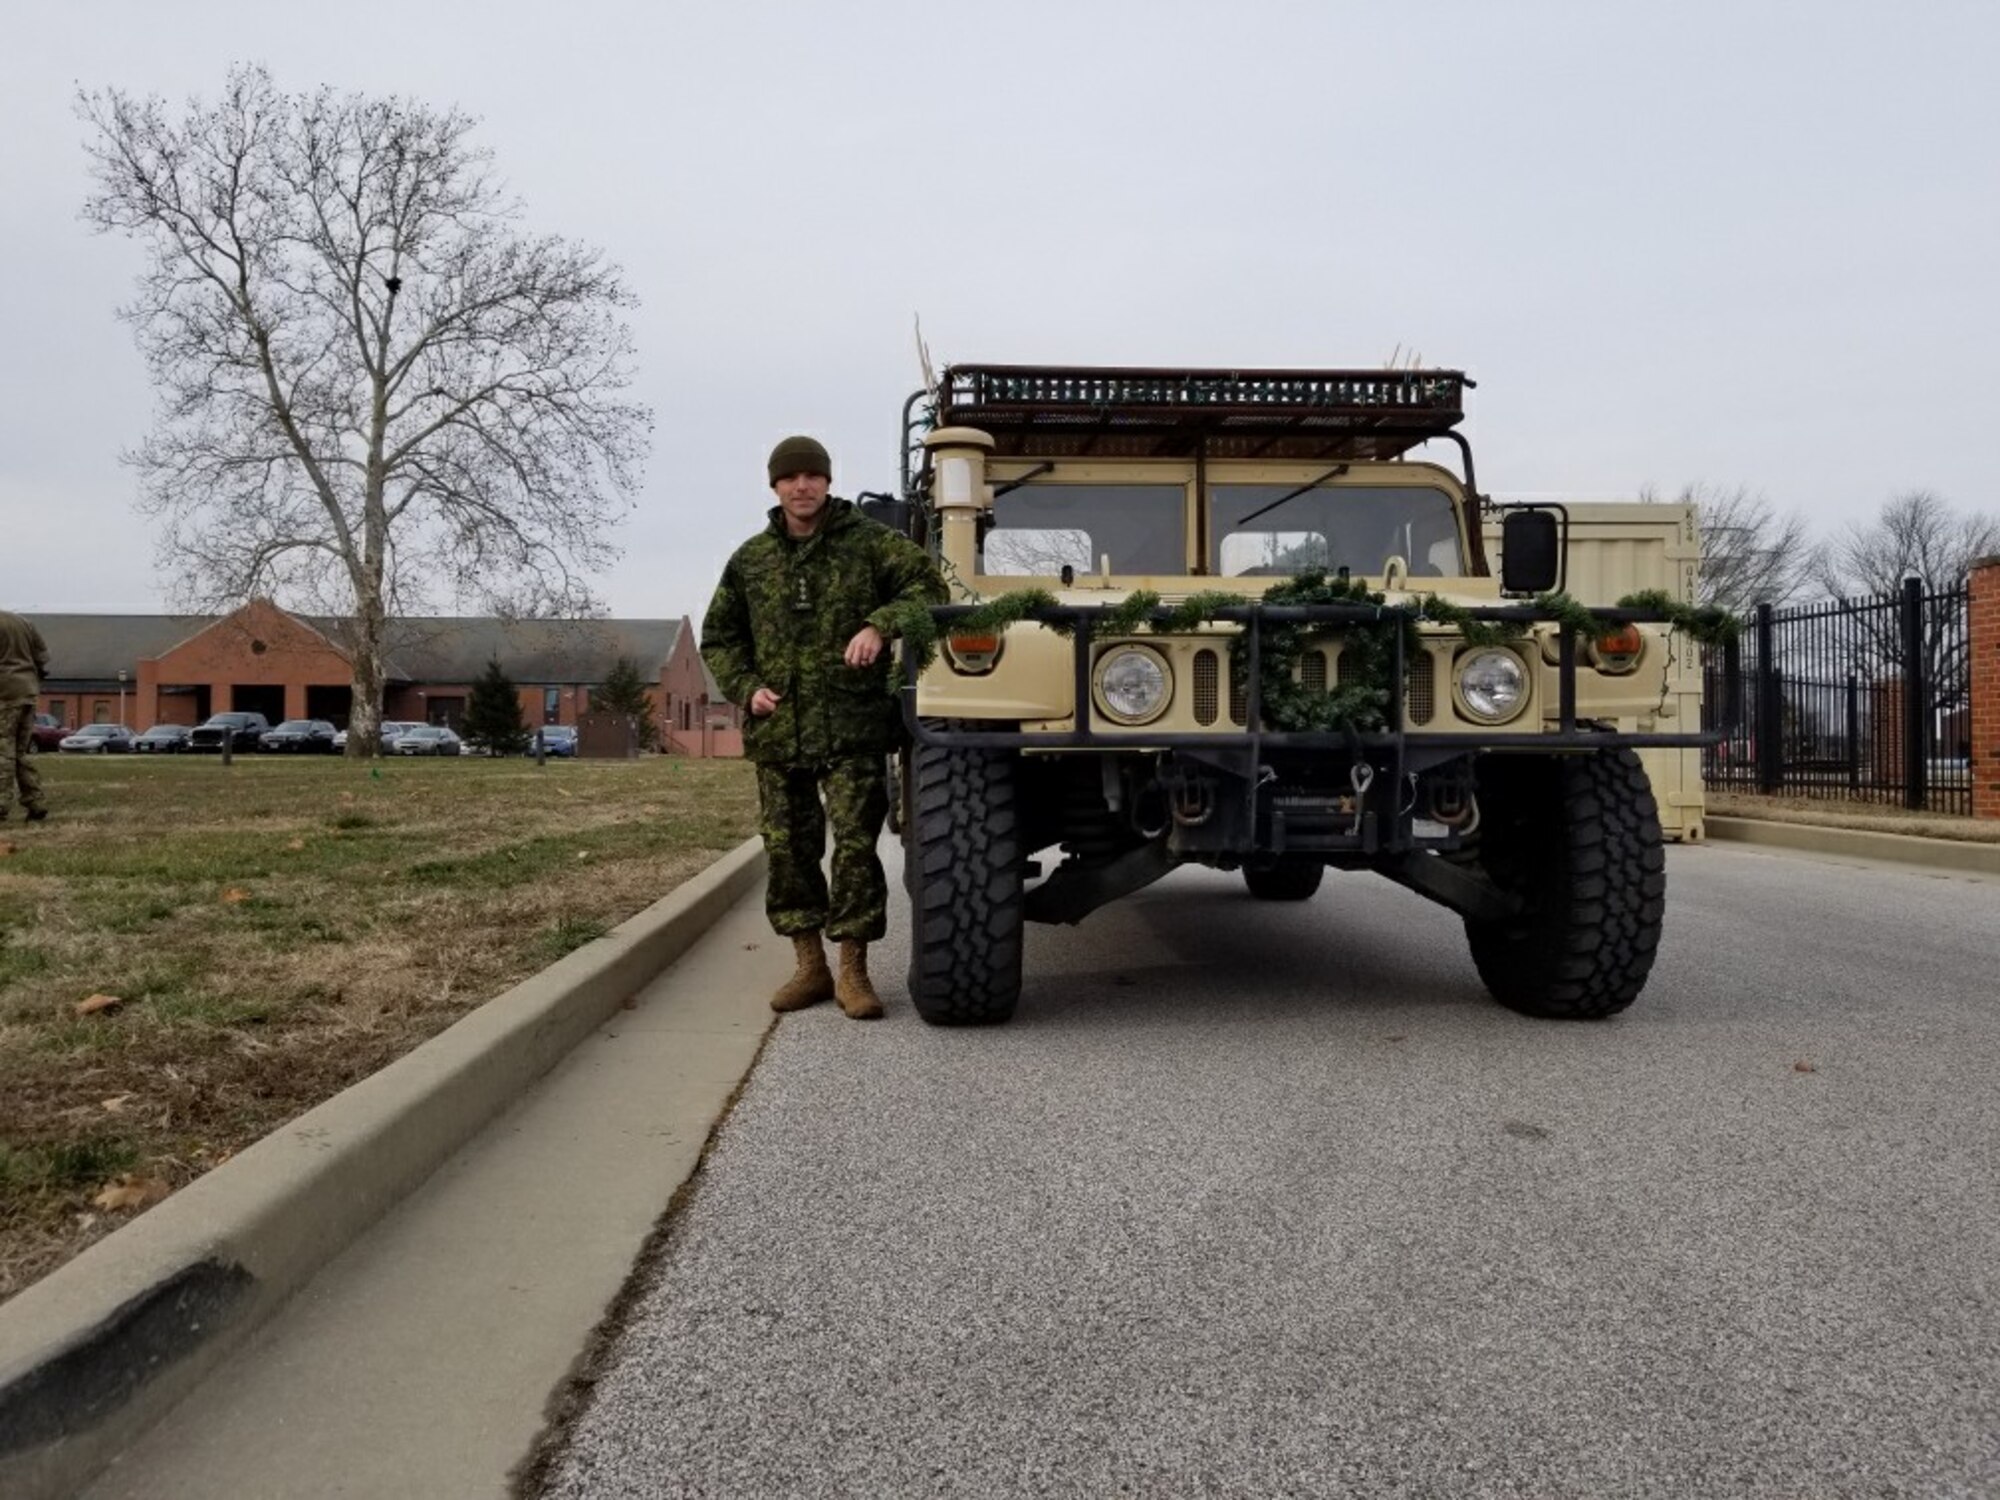 Capt. Patrick Rodrigue, shown here as a volunteer in a Christmas parade through the base, is a Canadian Flight Nursing officer on exchange with 375th Aeromedical Evacuation Squadron since 2018.